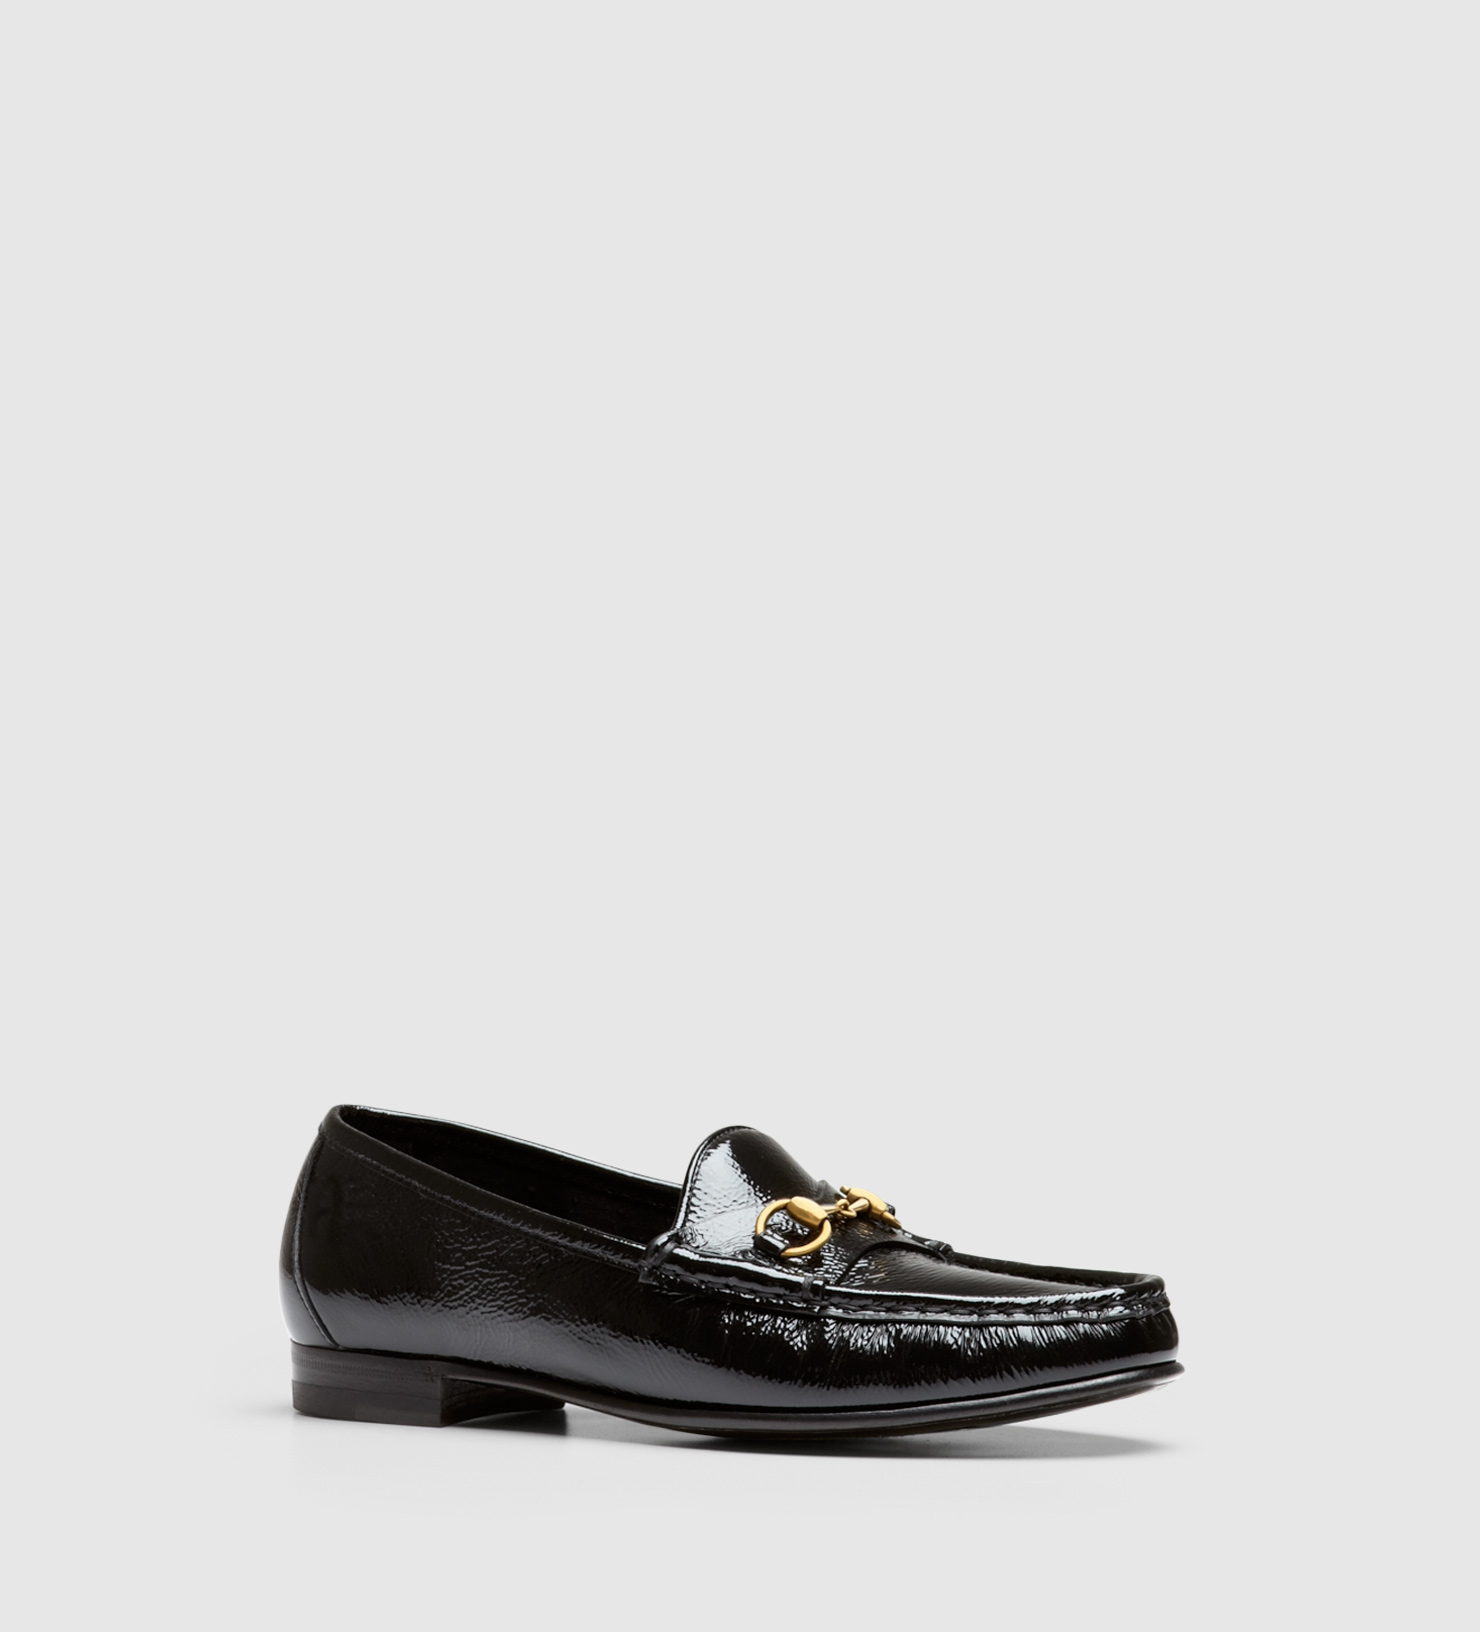 Gucci 1953 Horsebit Loafer In Patent Leather in Black | Lyst